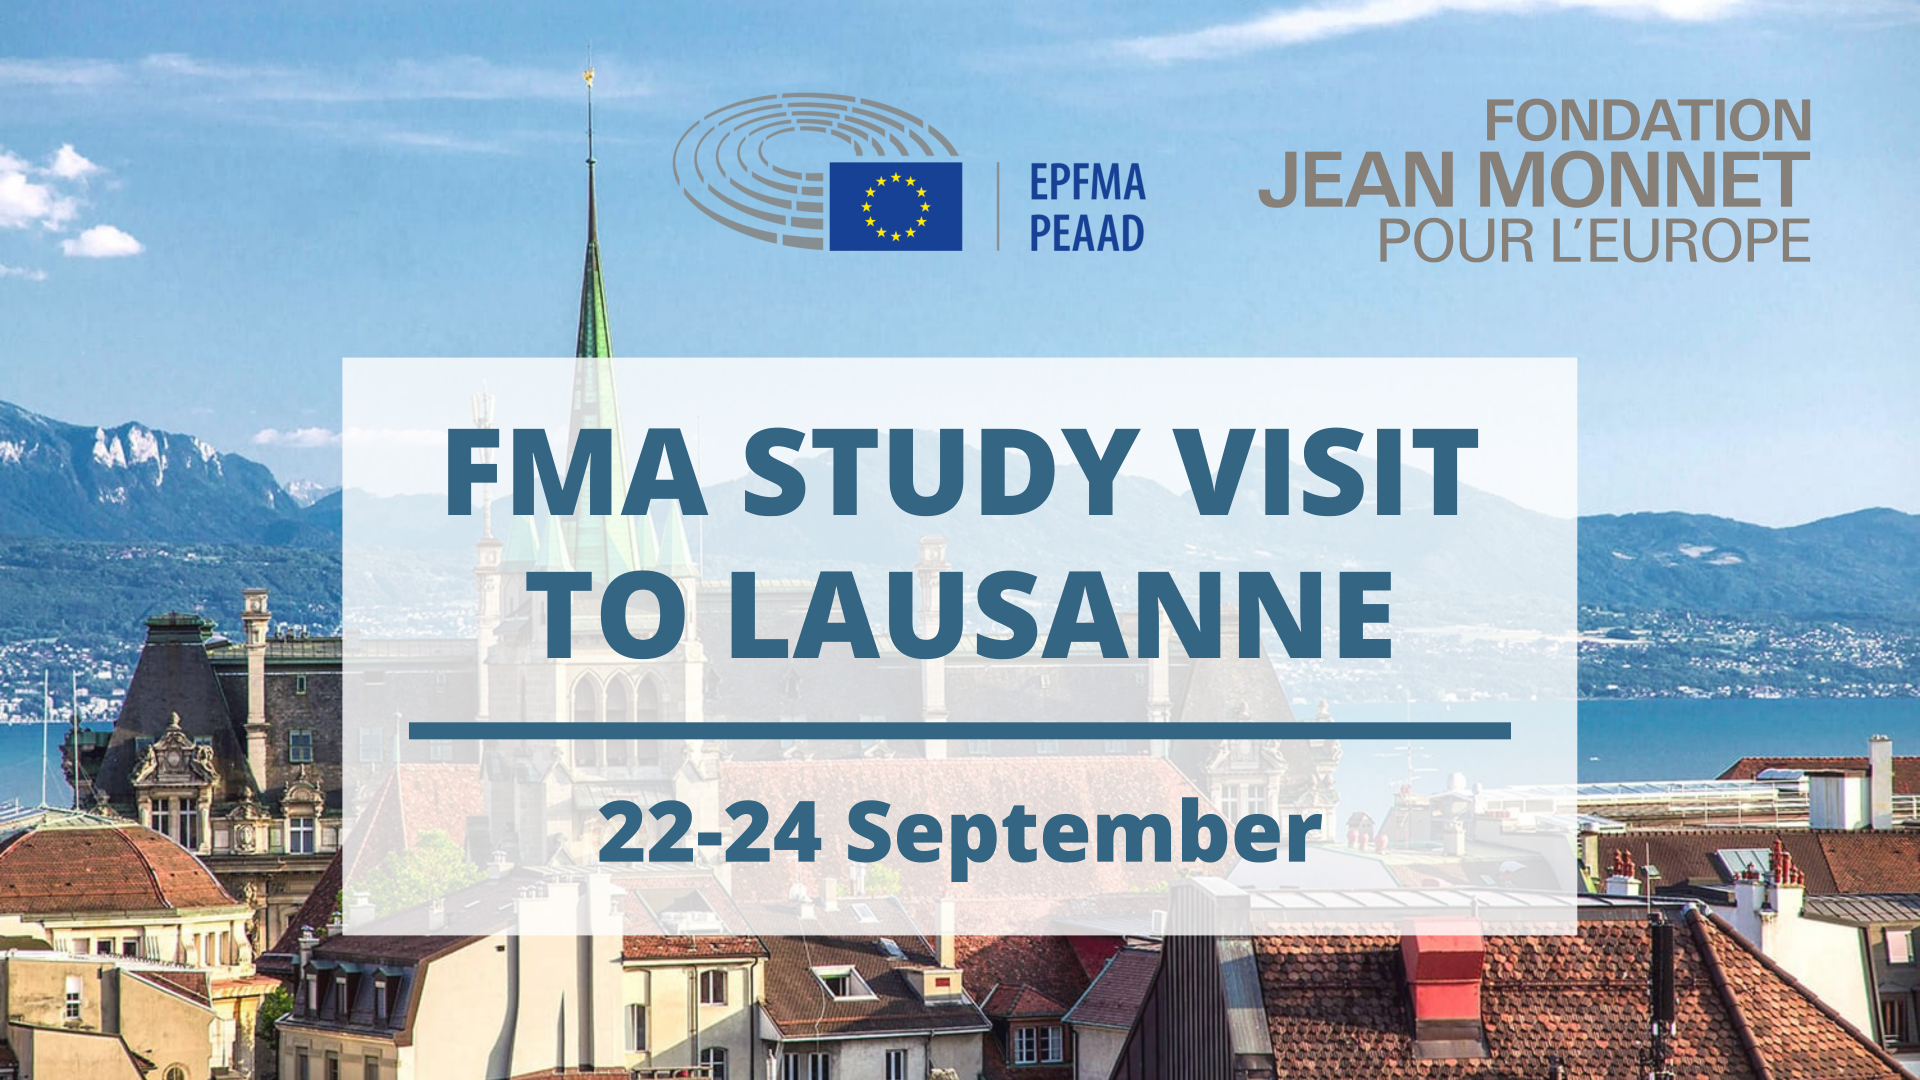 FMA Study visit 2022 to the Jean Monnet Foundation in Lausanne